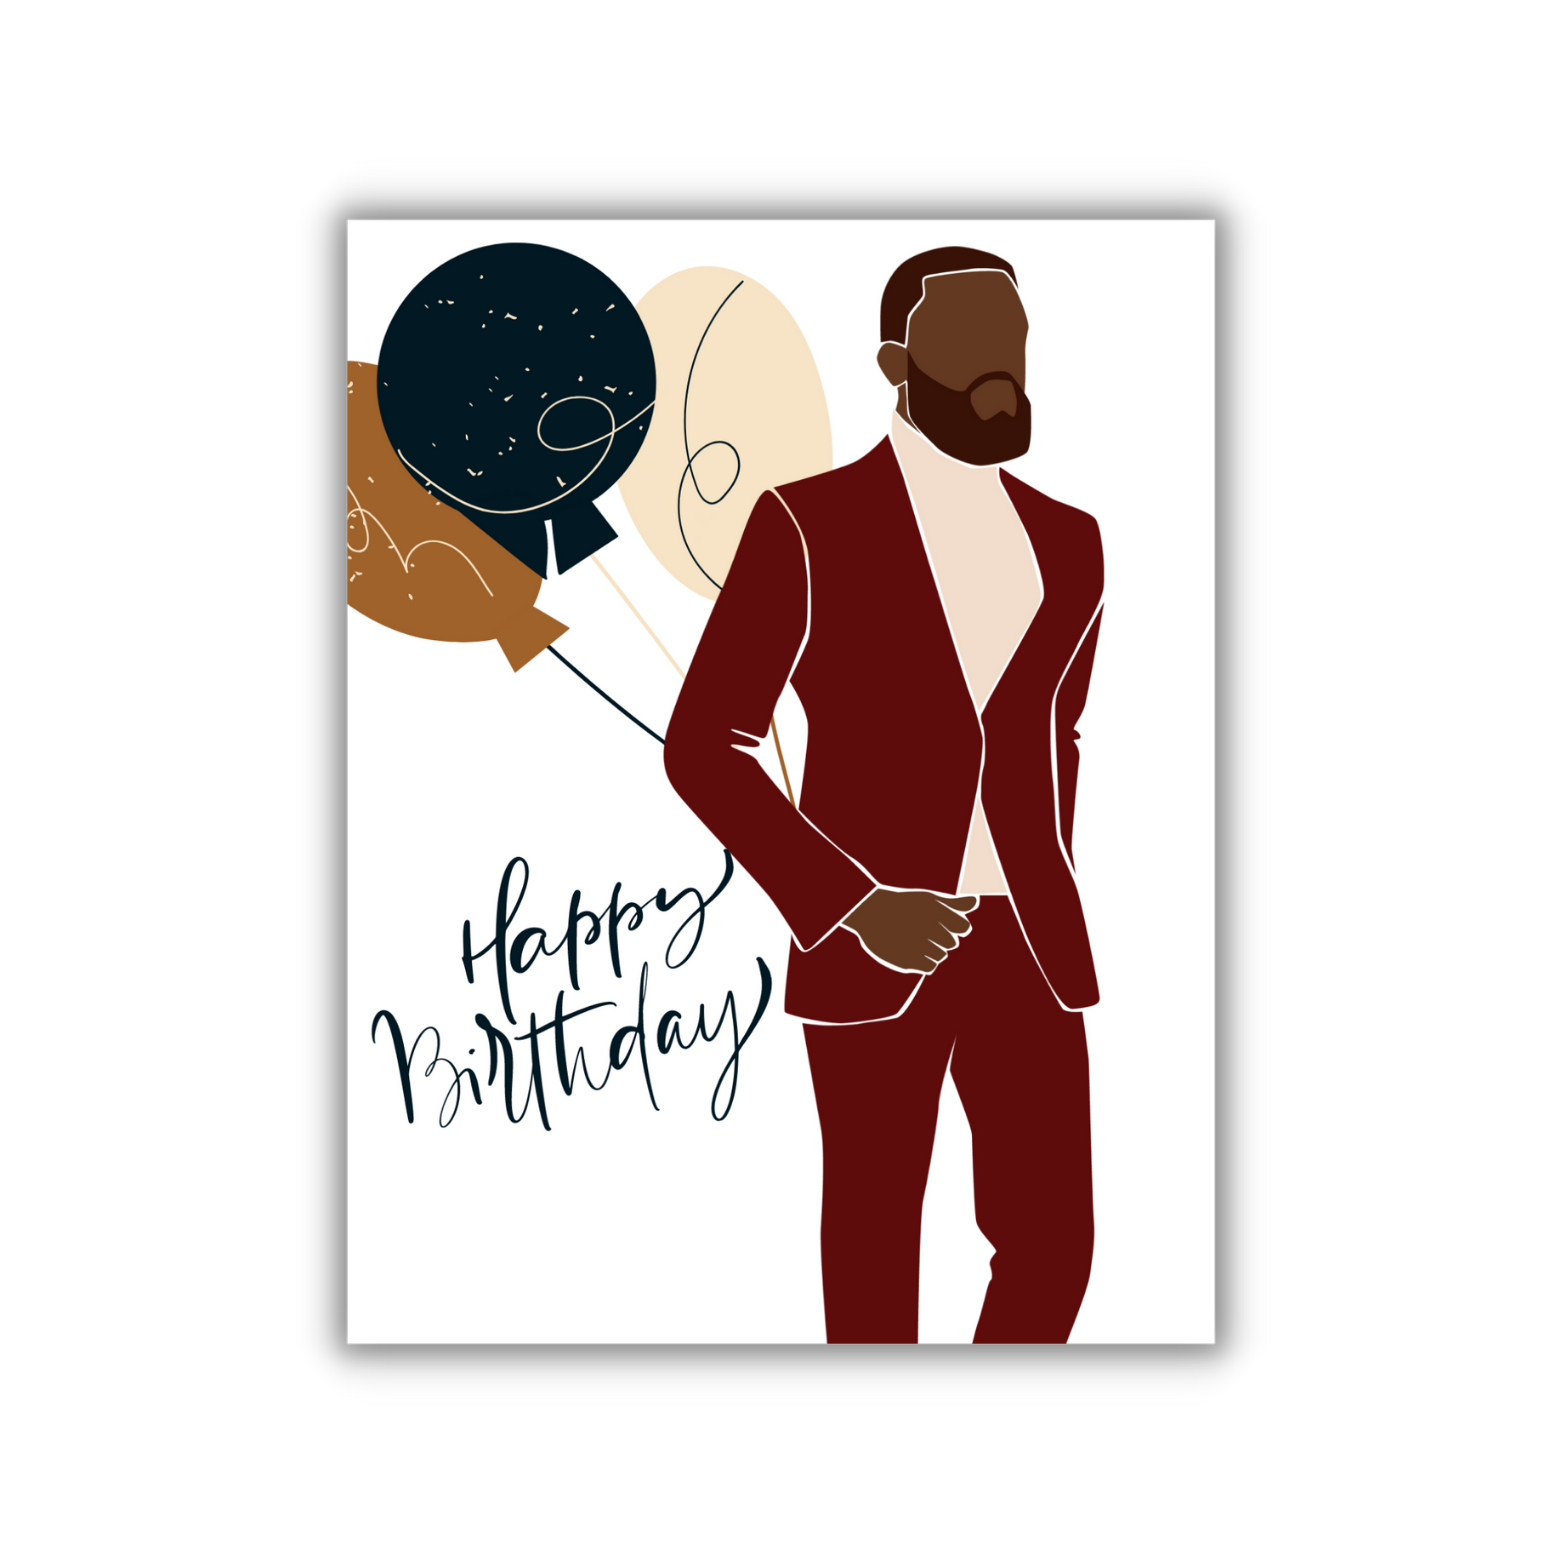 birthday card template for men